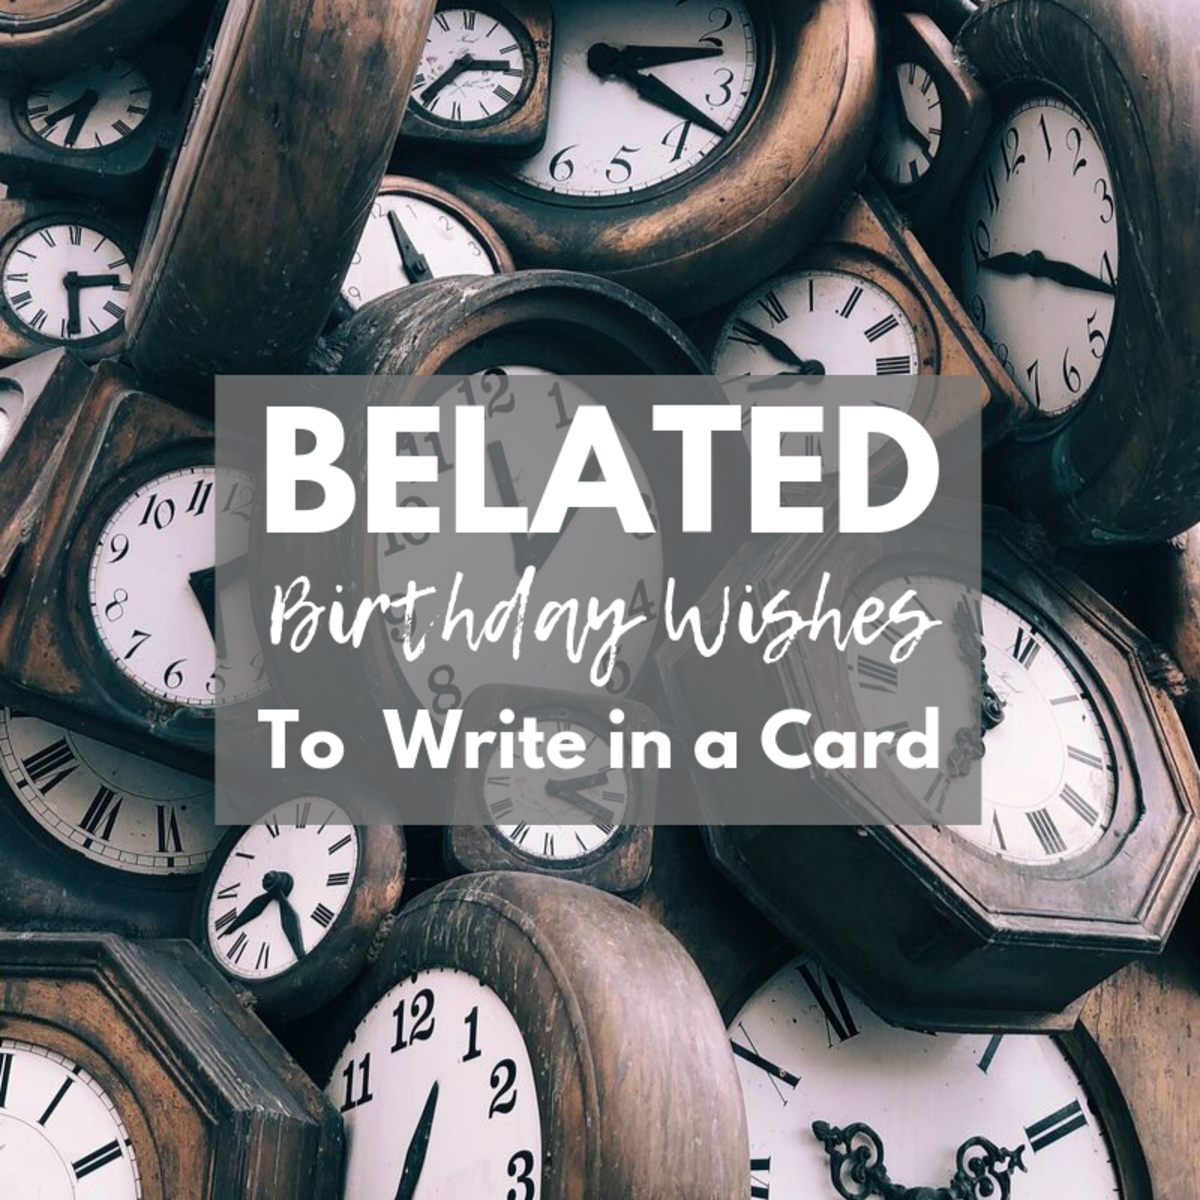 Belated Birthday Messages Funny And Sincere Wishes To Write In A